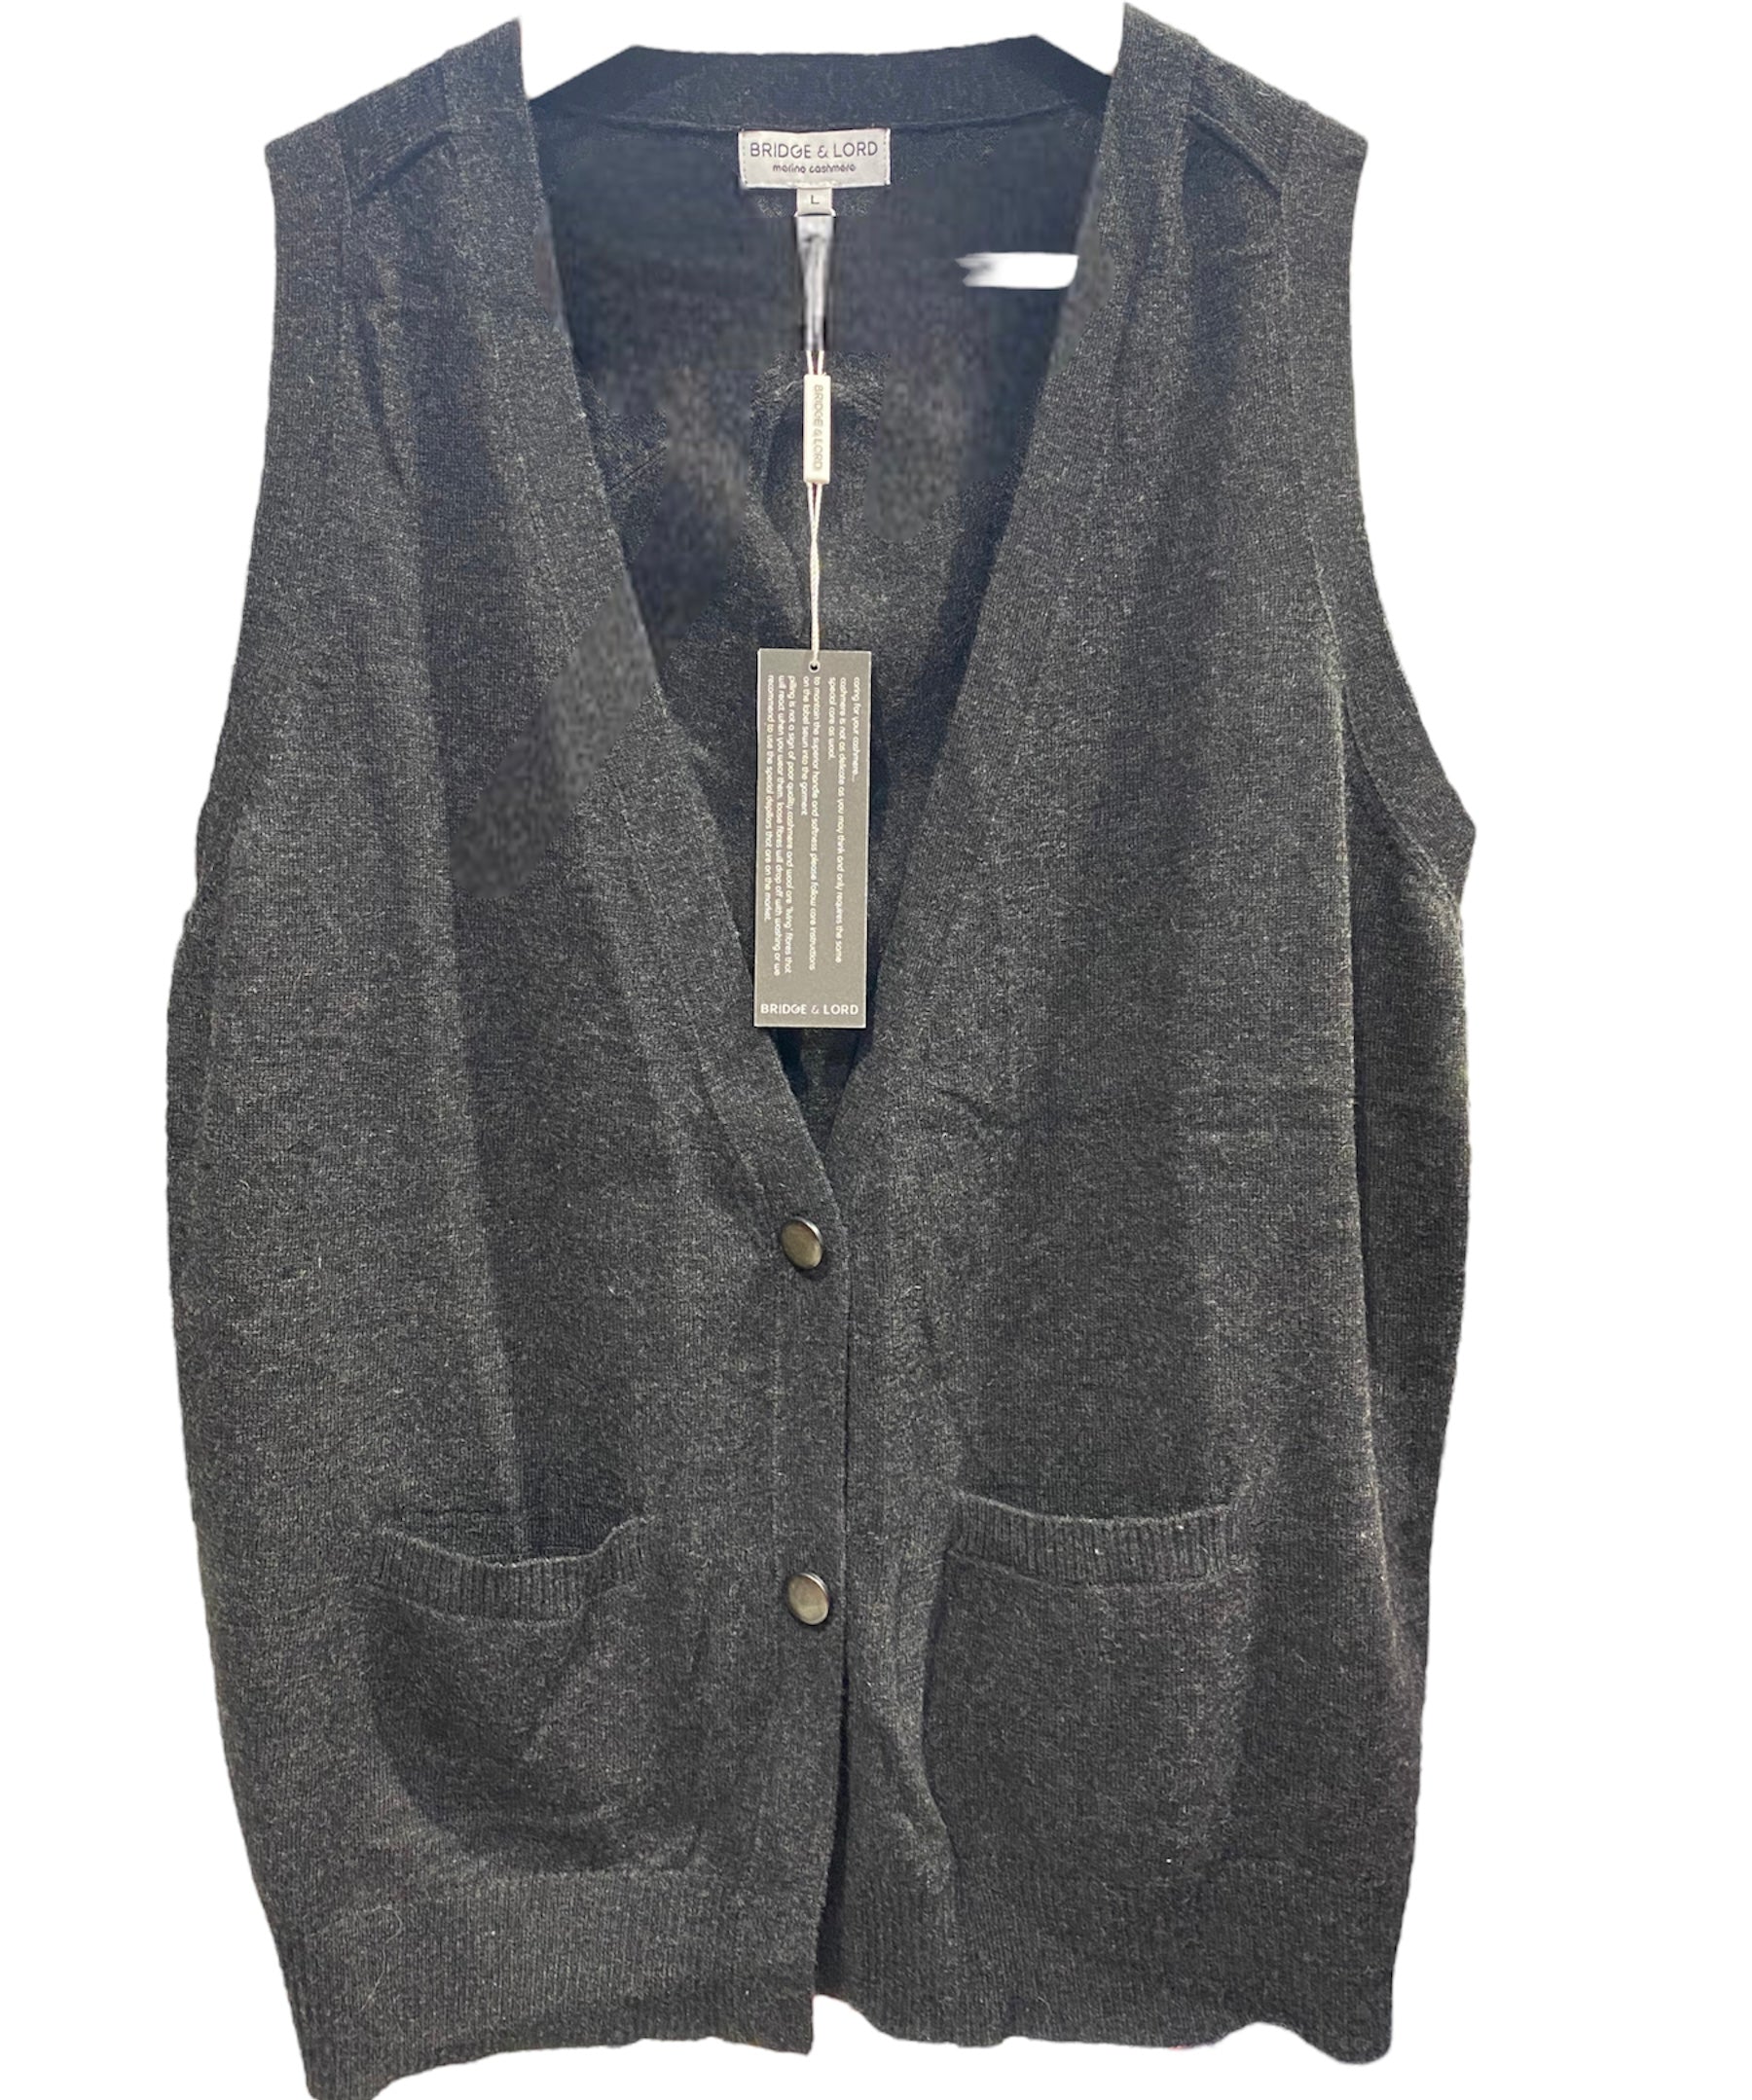 WOMENS CARDIGAN VEST WITH BUTTONS AND POCKETS